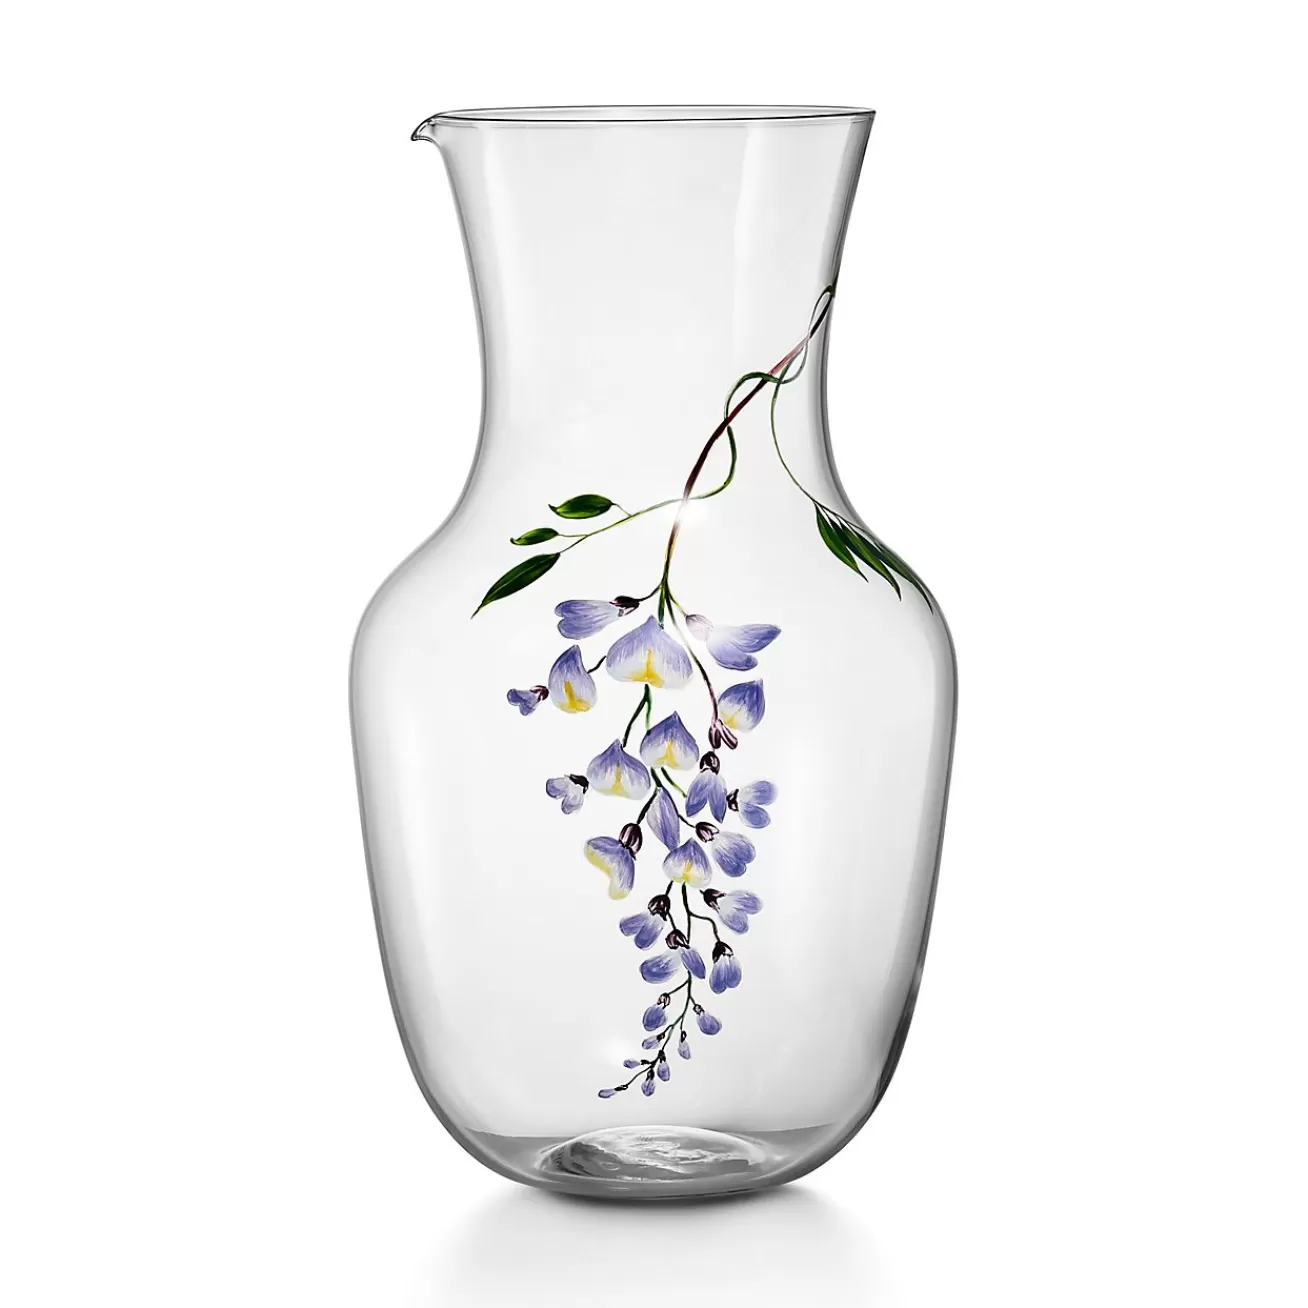 Tiffany & Co. Tiffany Wisteria Pitcher in Glass | ^ The Couple | Wedding Gifts